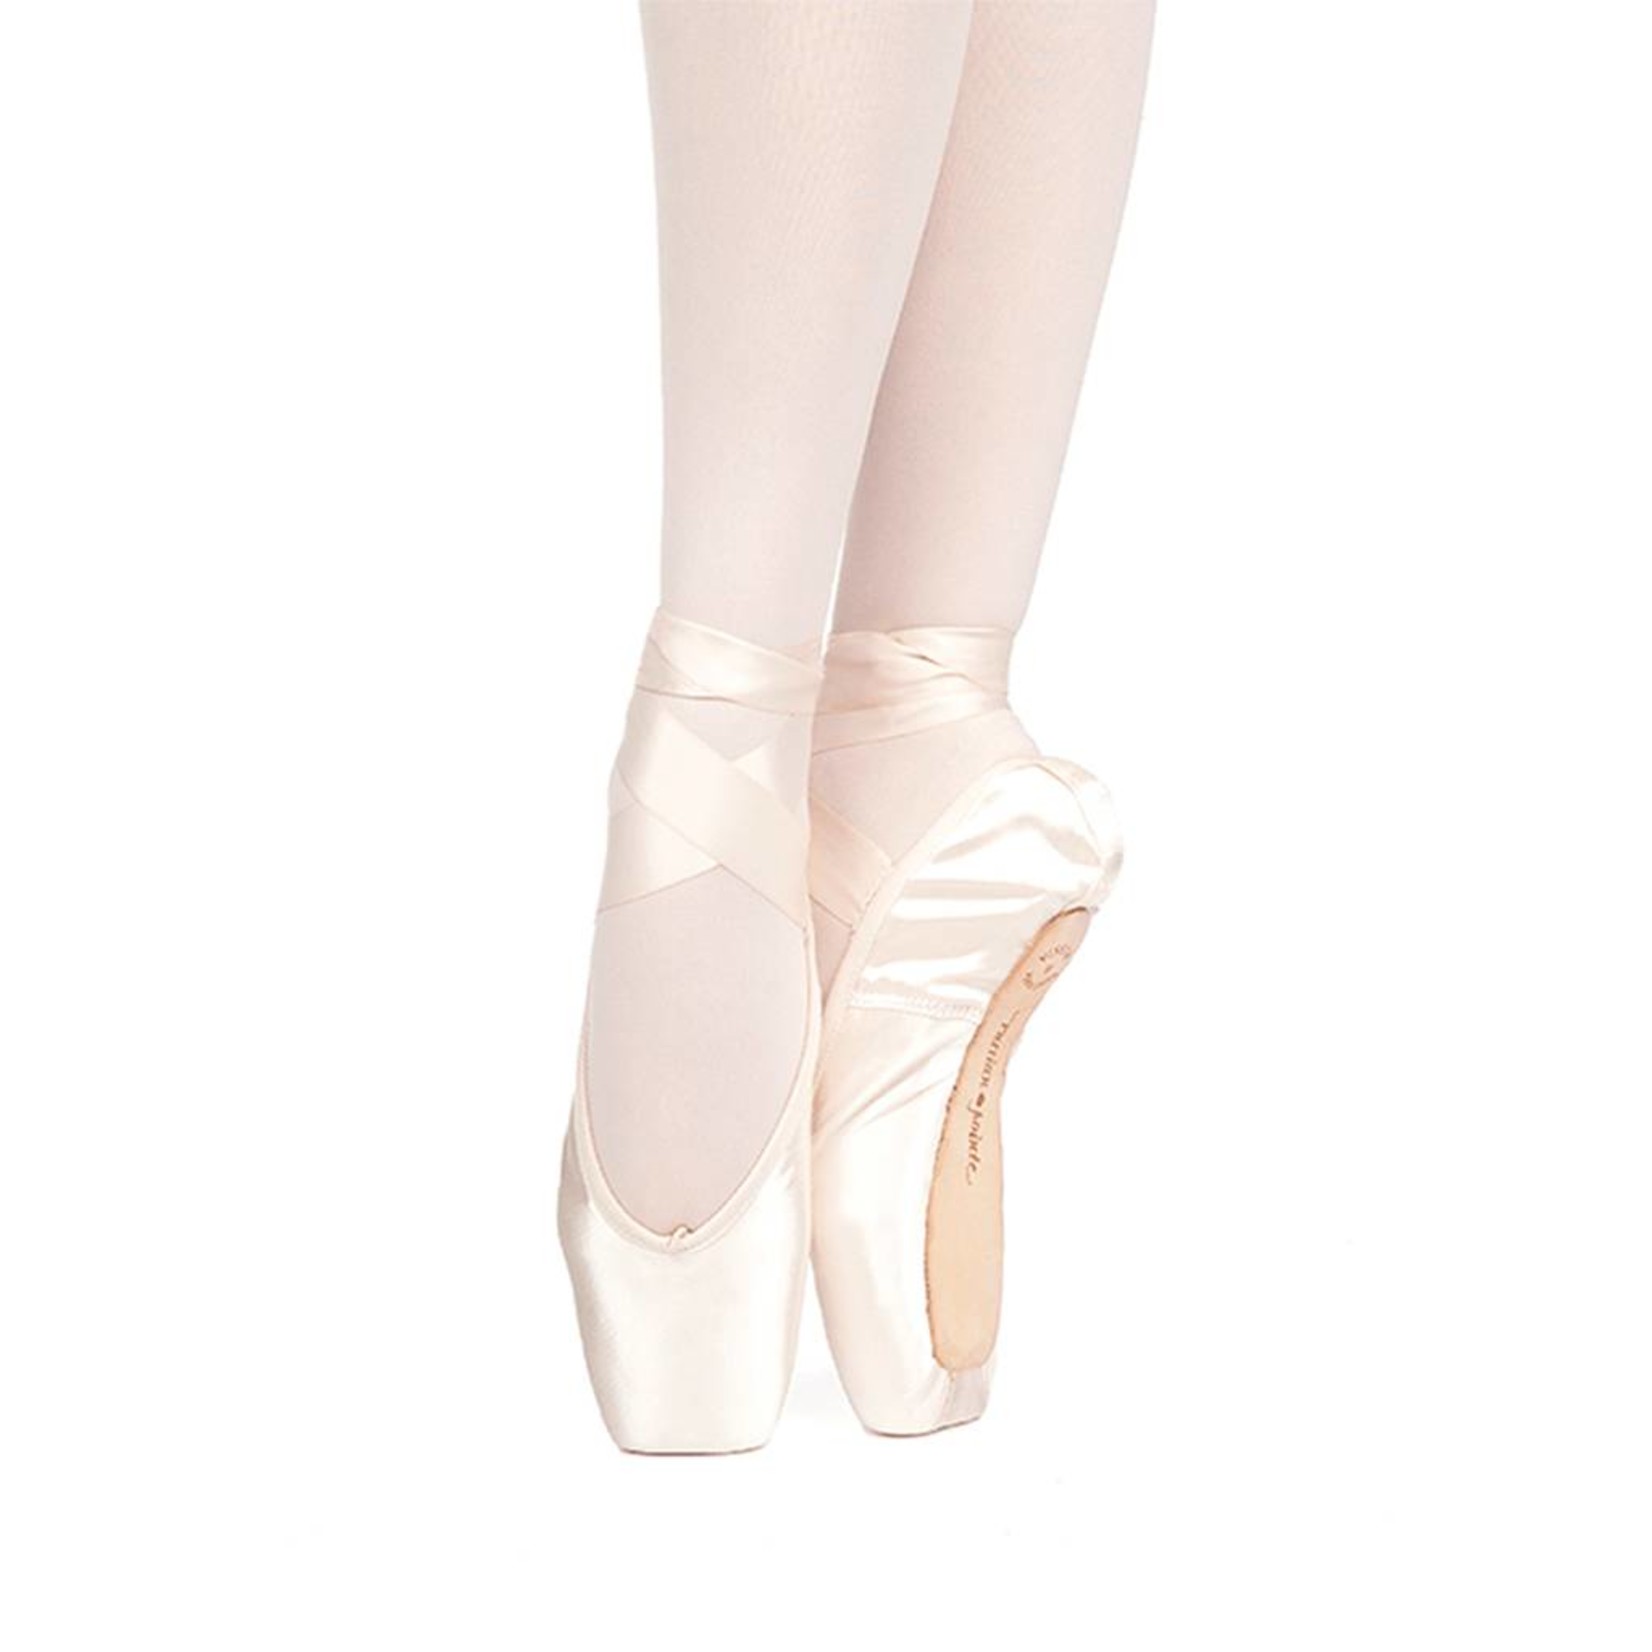 Russian Pointe Size 42: Muse U-Cut Pointe Shoes with Drawstring